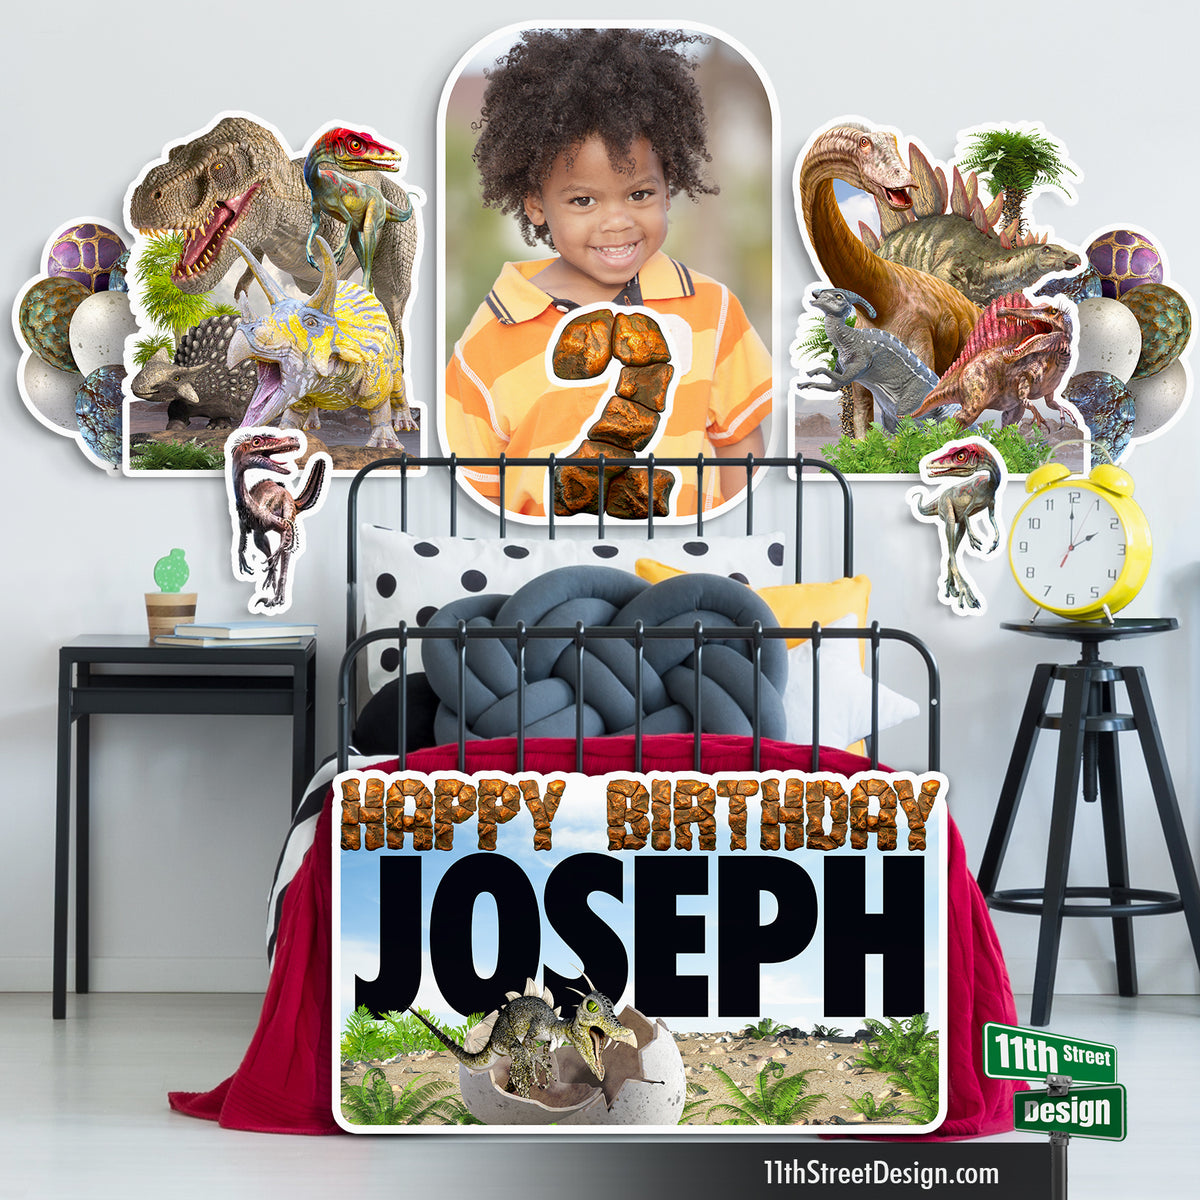 Personalized Dinosaur Birthday Photo Lawn Signs, The Perfect Yard Decor For Your Party, Weatherproof for outside displays, Realistic Dinosaurs